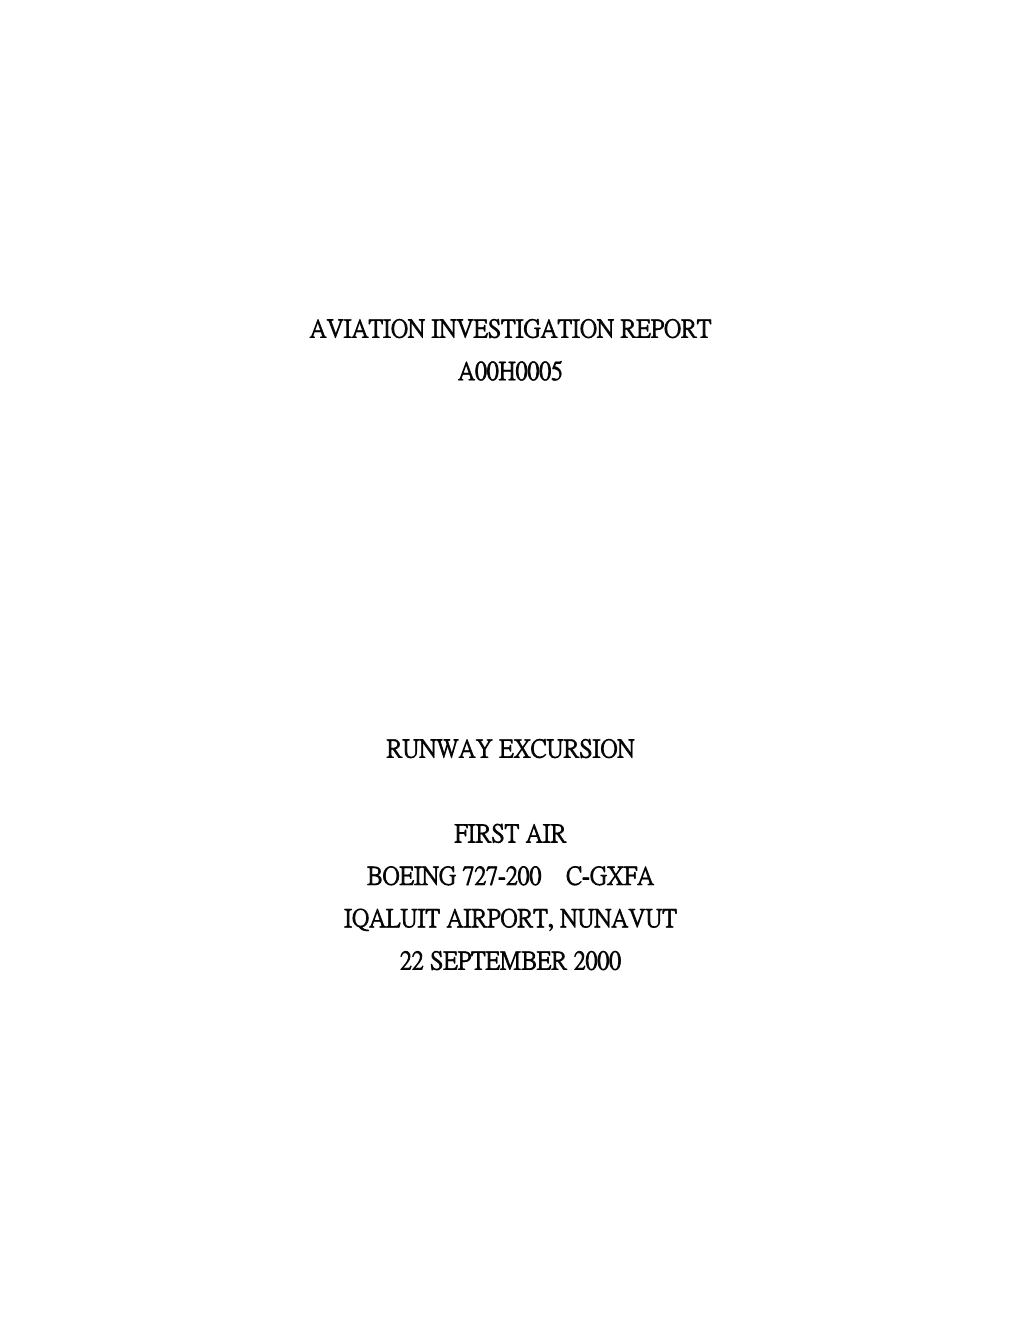 Aviation Investigation Report A00h0005 Runway Excursion First Air Boeing 727-200 C-Gxfa Iqaluit Airport, Nunavut 22 September 2